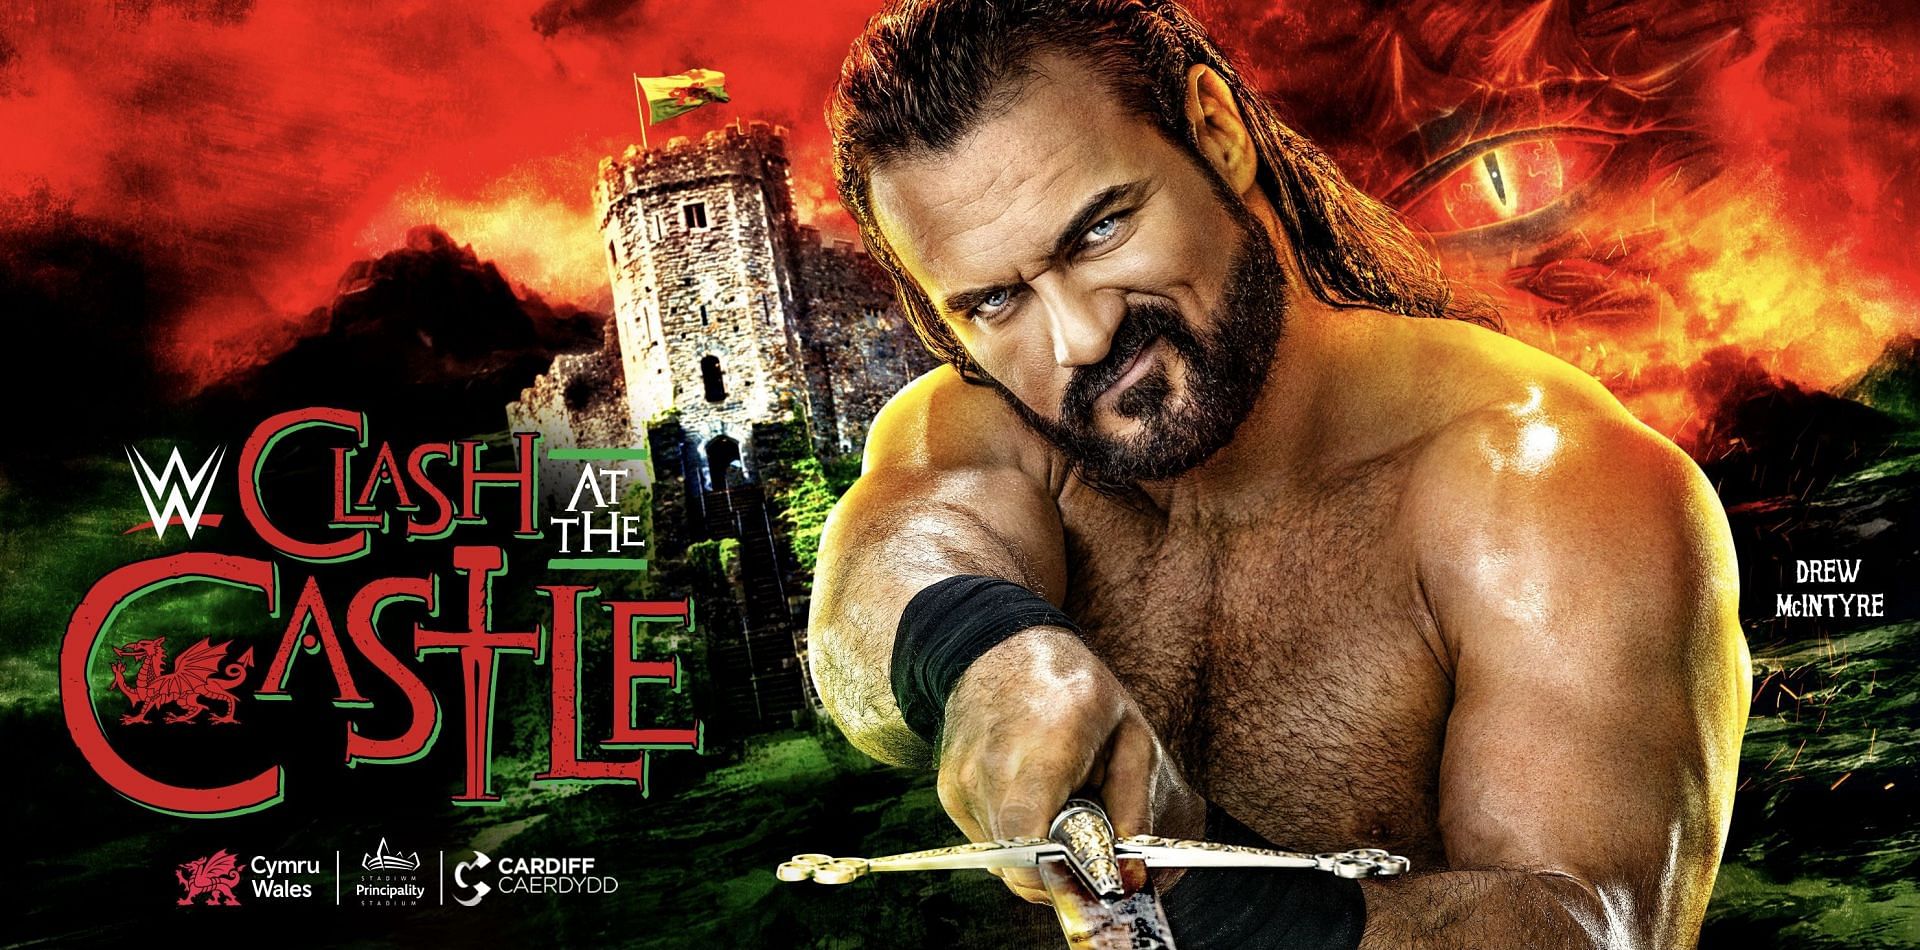 WWE Clash at the Castle will be one of their biggest events in the United Kingdom in decades